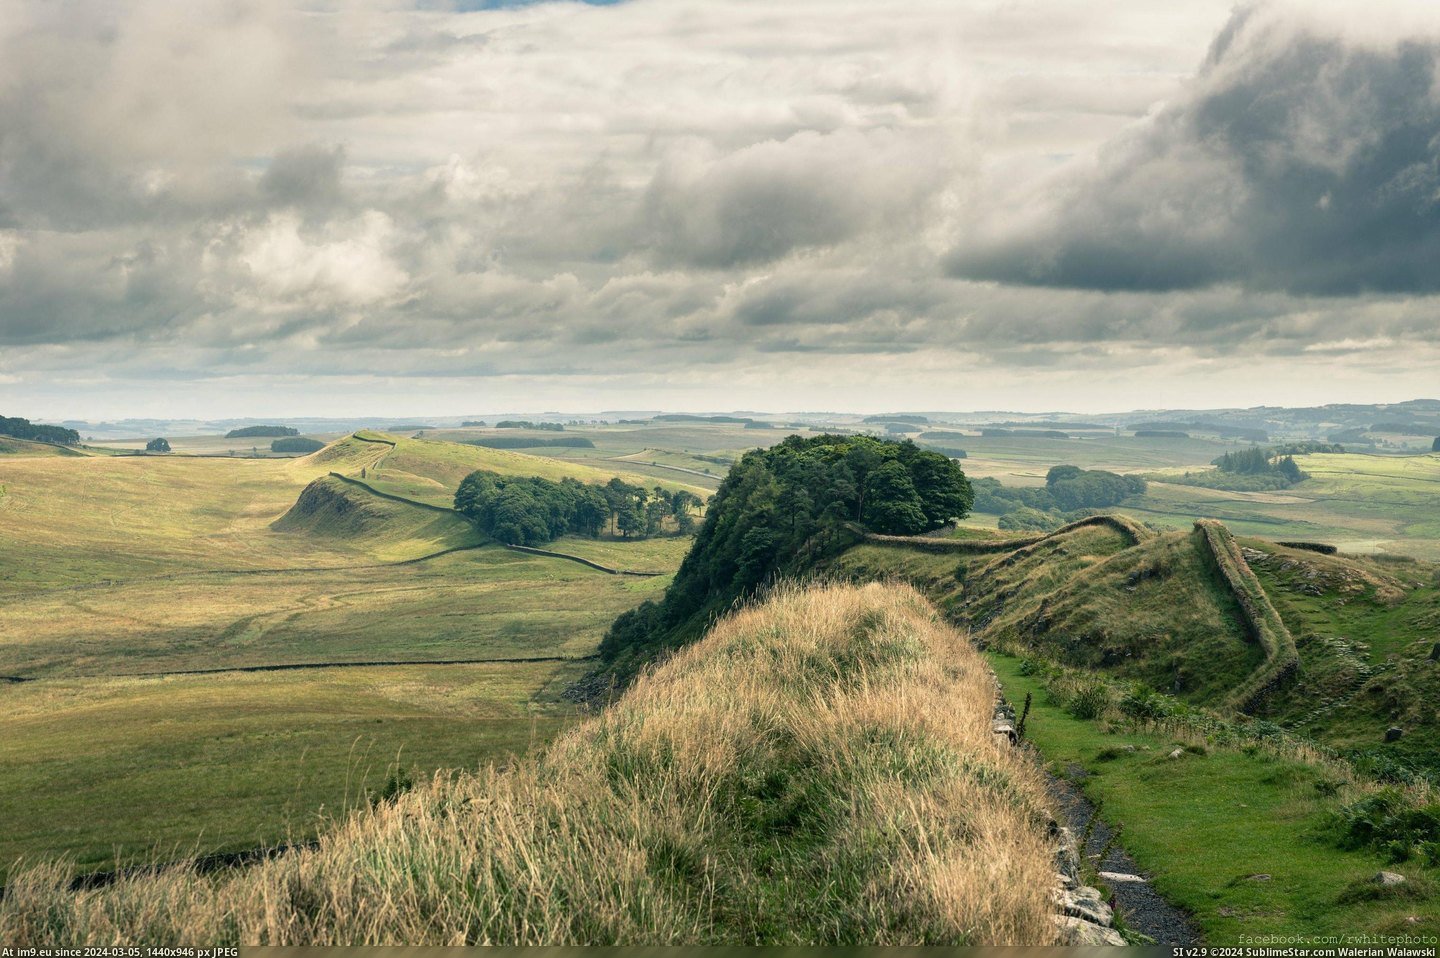 #Show #Wall #Allowed #Impossible #Hadrian #Landscape #Stunning [Earthporn] I don't know if this will be allowed here, but it's impossible to show the stunning landscape around Hadrian's Wall  Pic. (Image of album My r/EARTHPORN favs))